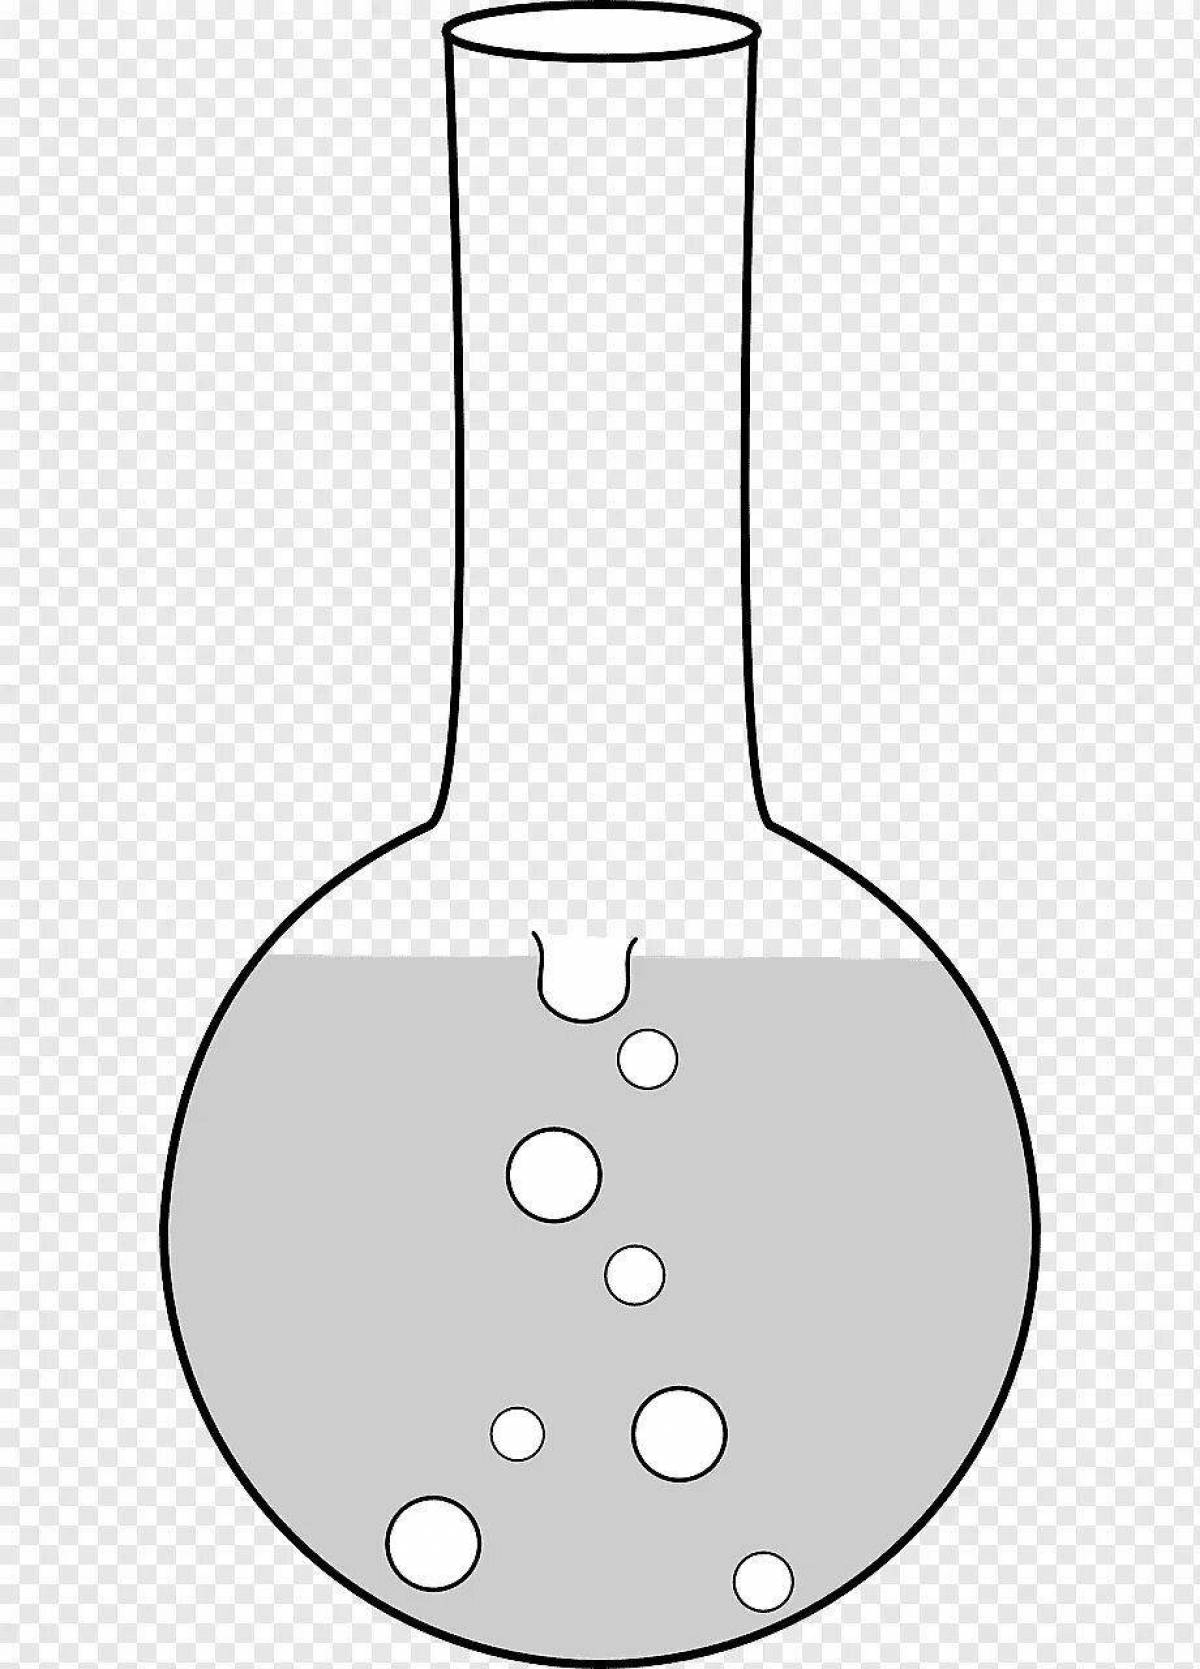 Chemical flask coloring page